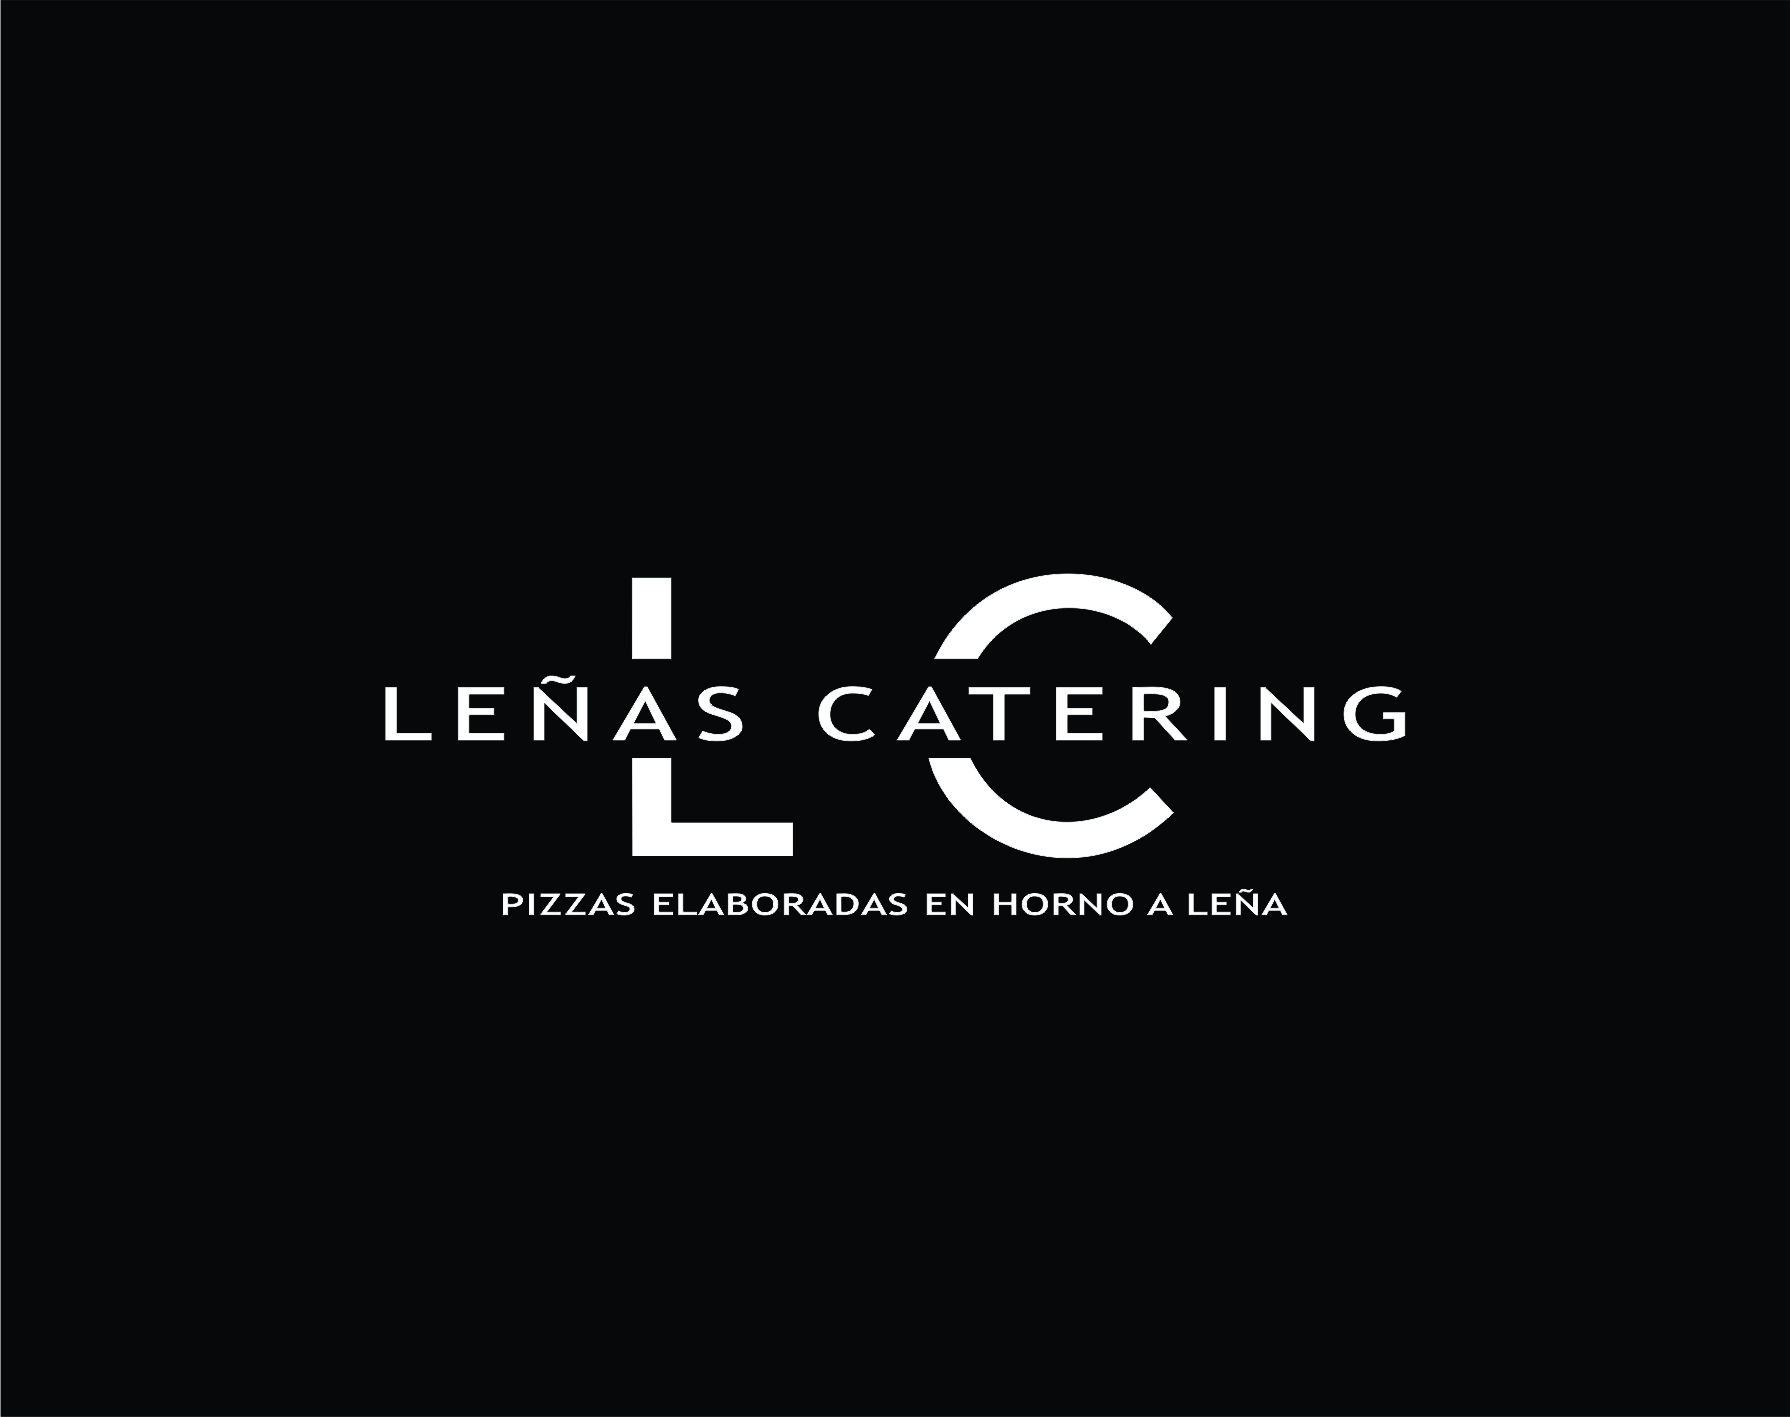 Lc catering